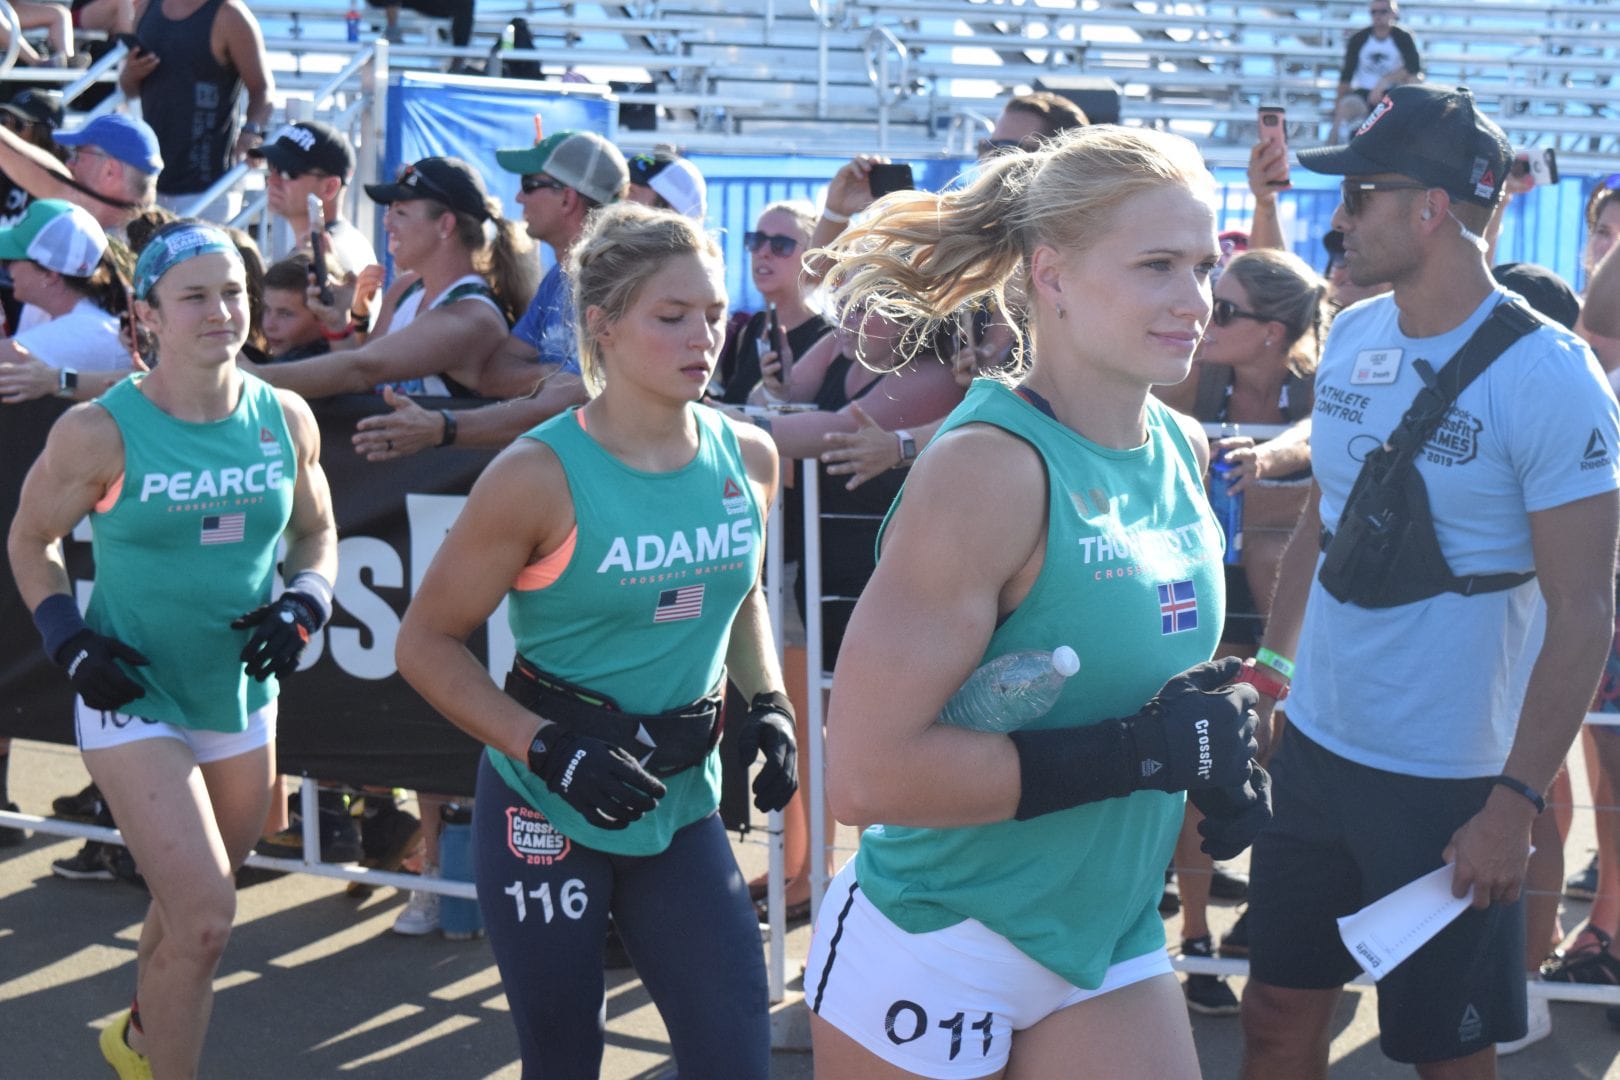 Annie Thorisdottir enters the field on the first day of the CrossFit Games.